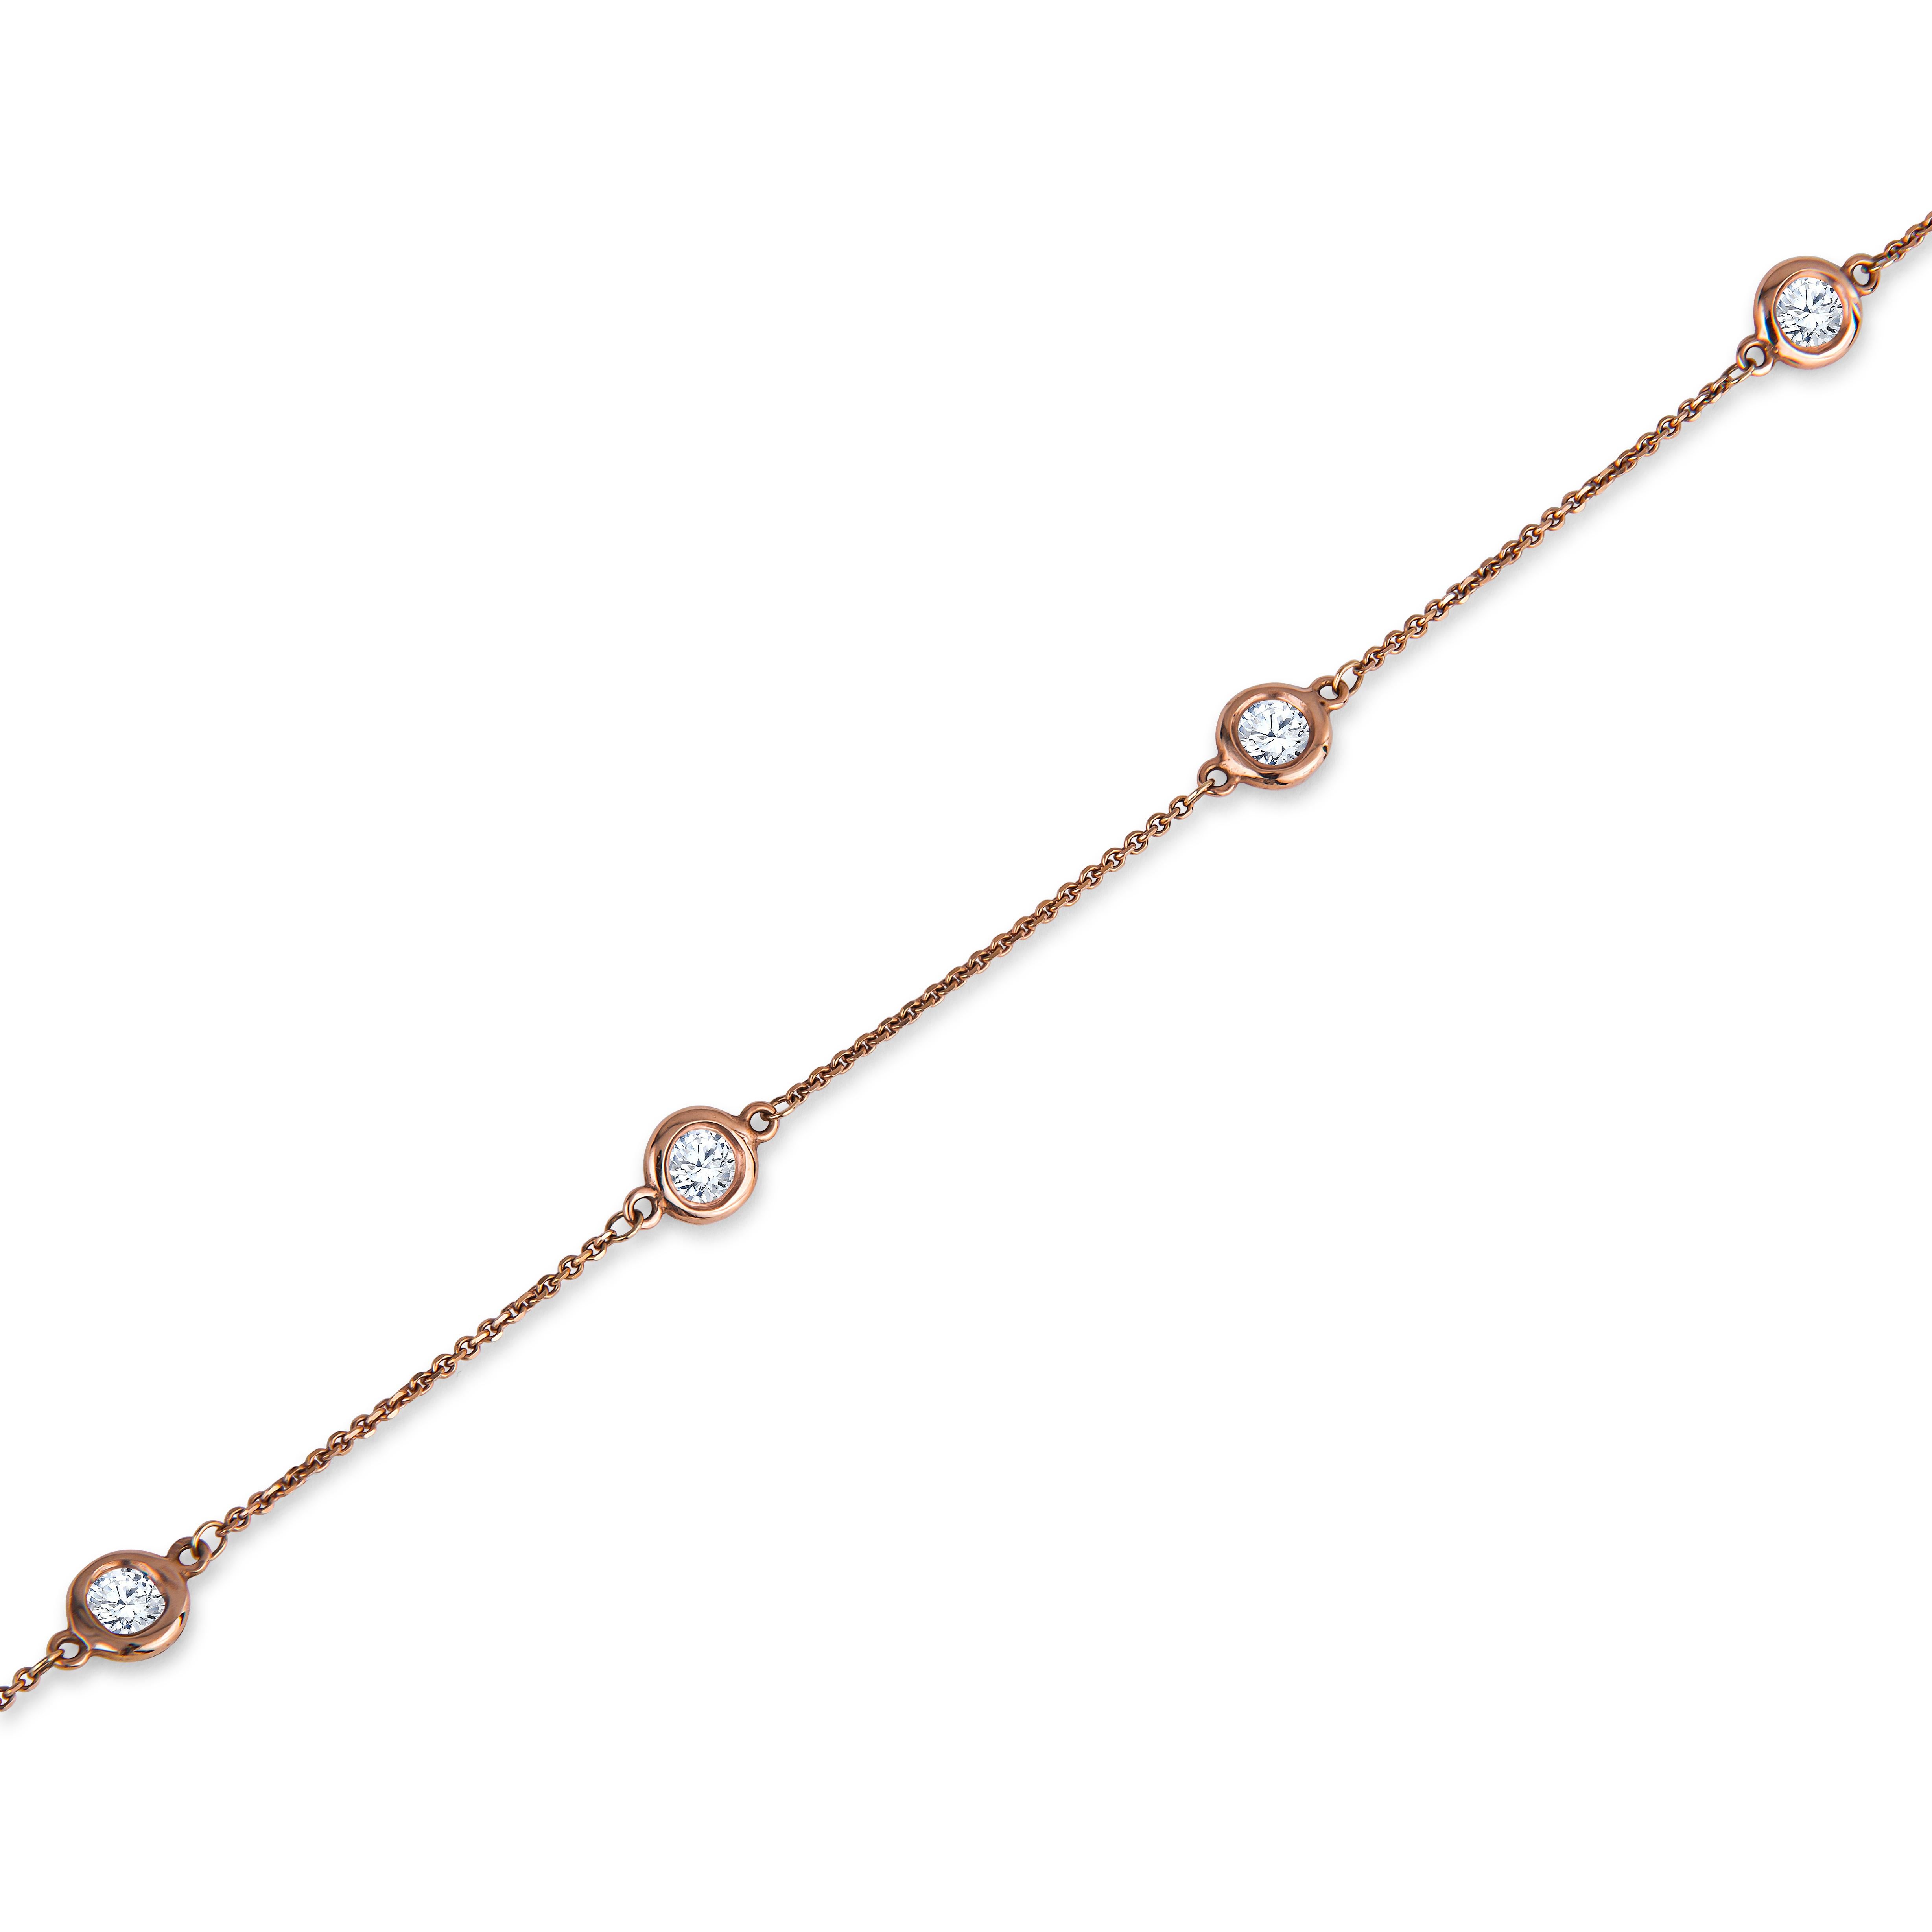 This station necklace is part of our Soft Glamour collection. It features 12 round diamonds with a 2.01ctw, set in a 14kt rose gold 18 inch chain. It is the ideal necklace to add elegance for everyday wear.